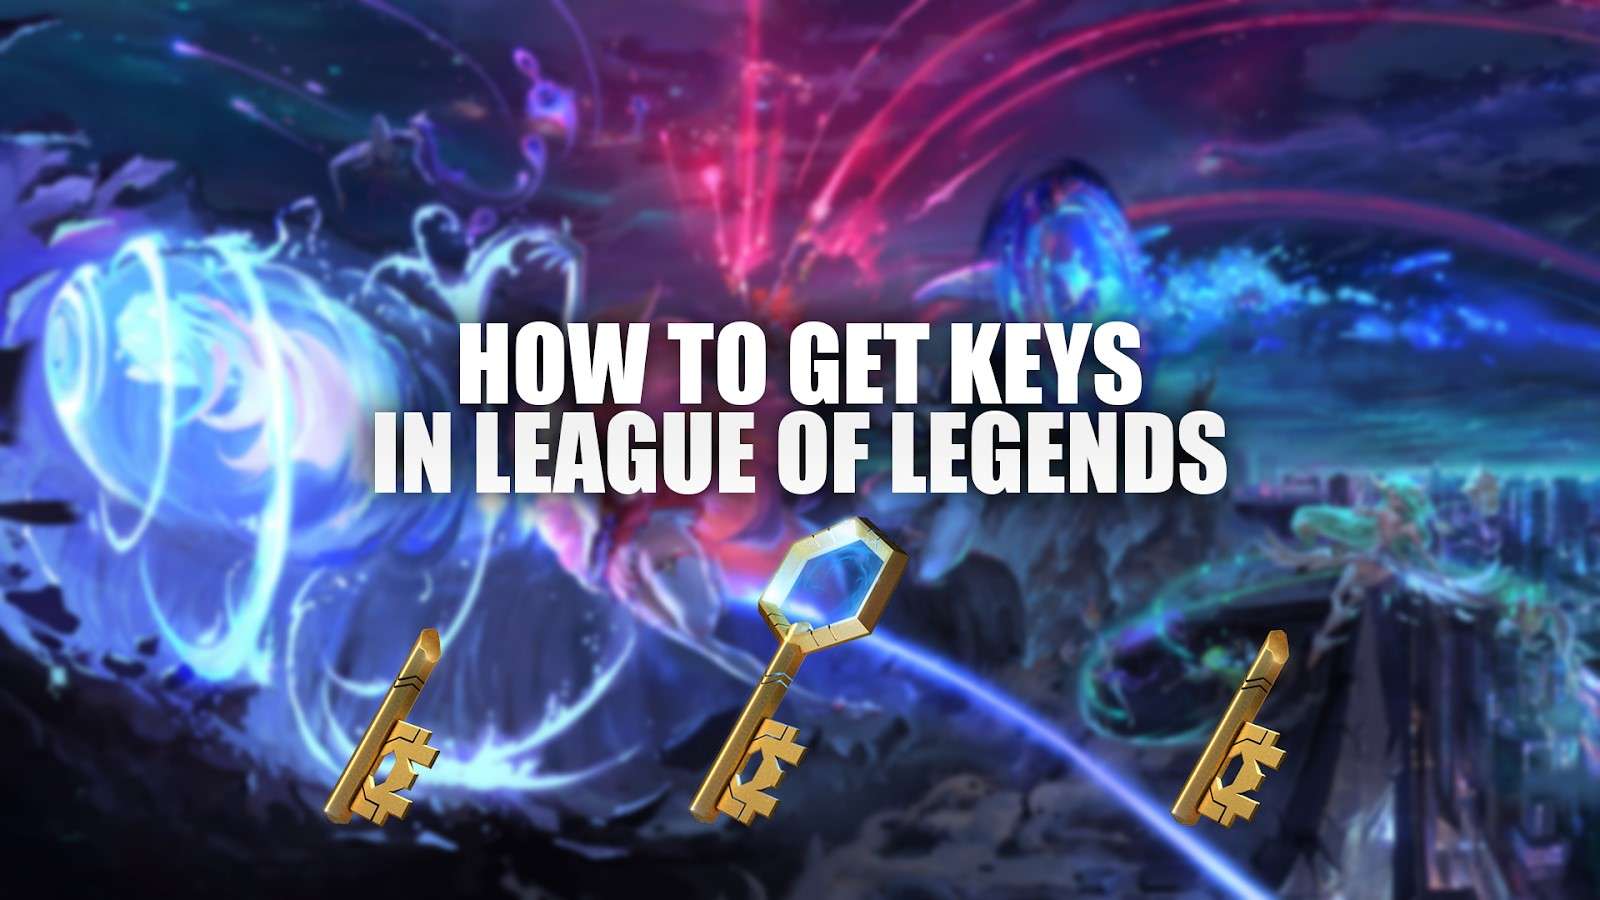 How To Get Keys in League of Legends